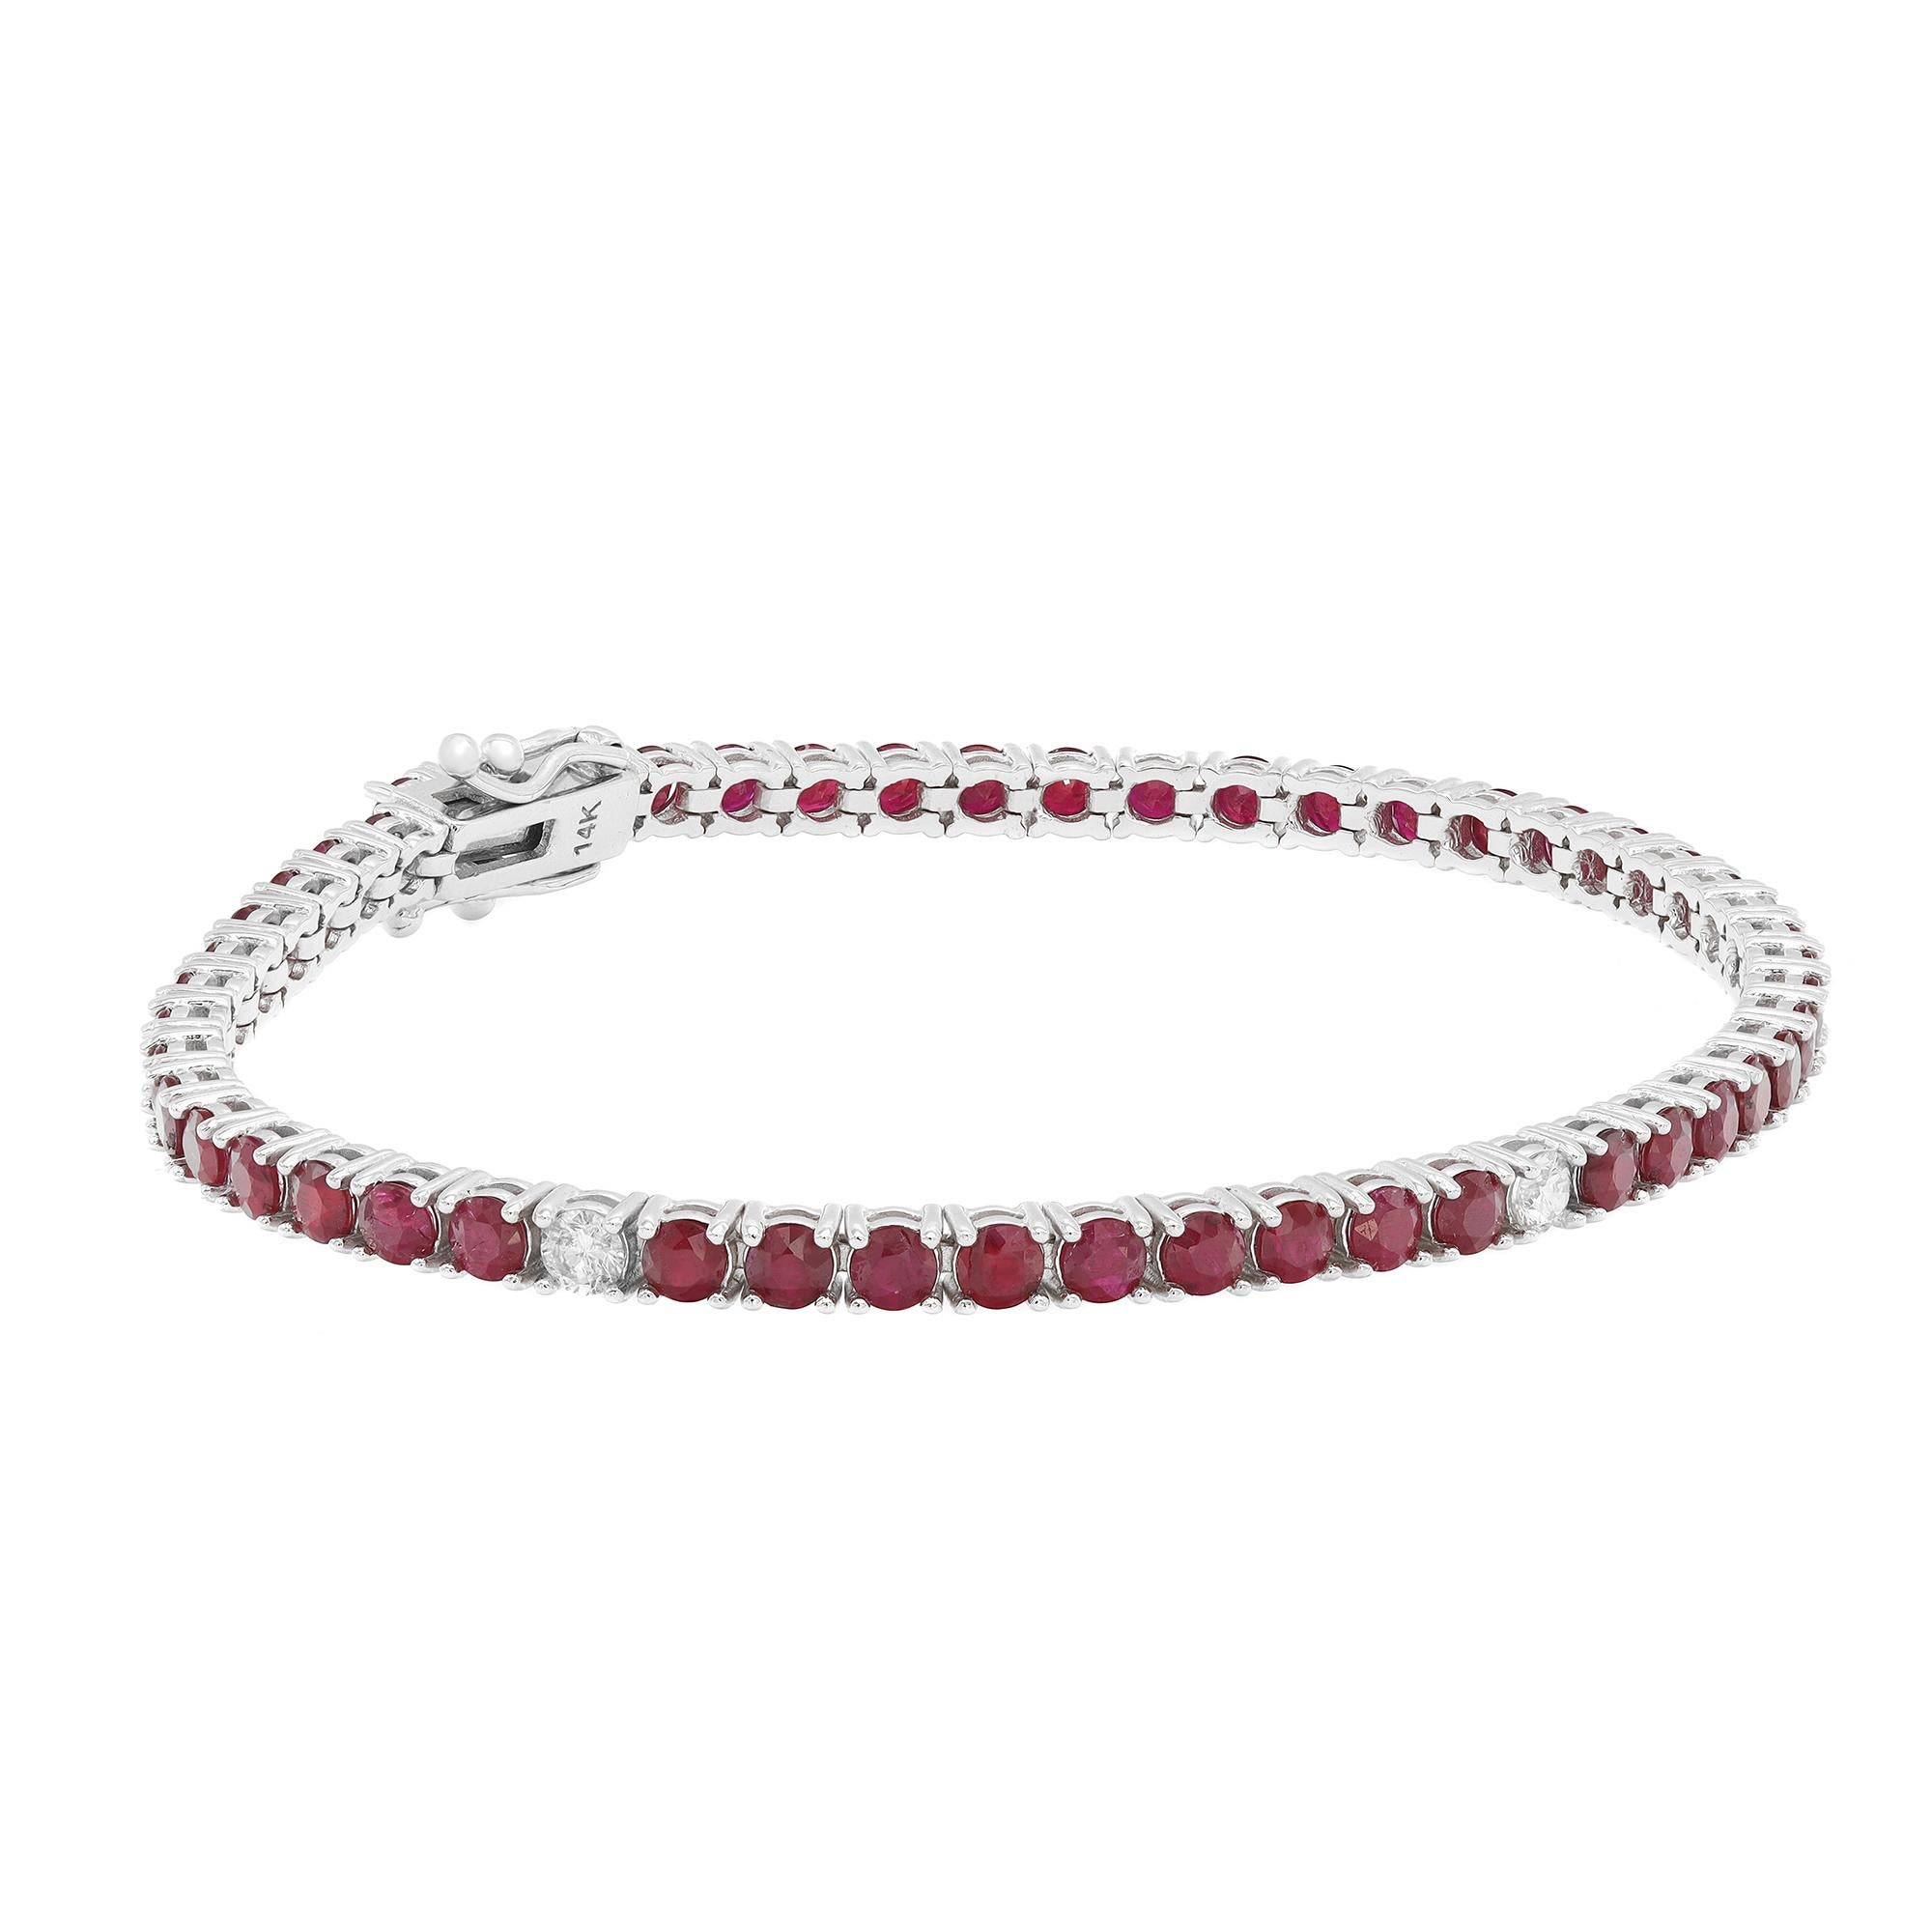 This beautifully crafted tennis bracelet features round cut Rubies and diamonds encrusted in four prong setting. Crafted in 14k white gold. Total diamond weight: 0.29 carat. Diamond Quality: G-H color and VS-SI clarity. Total Ruby weight: 6.60